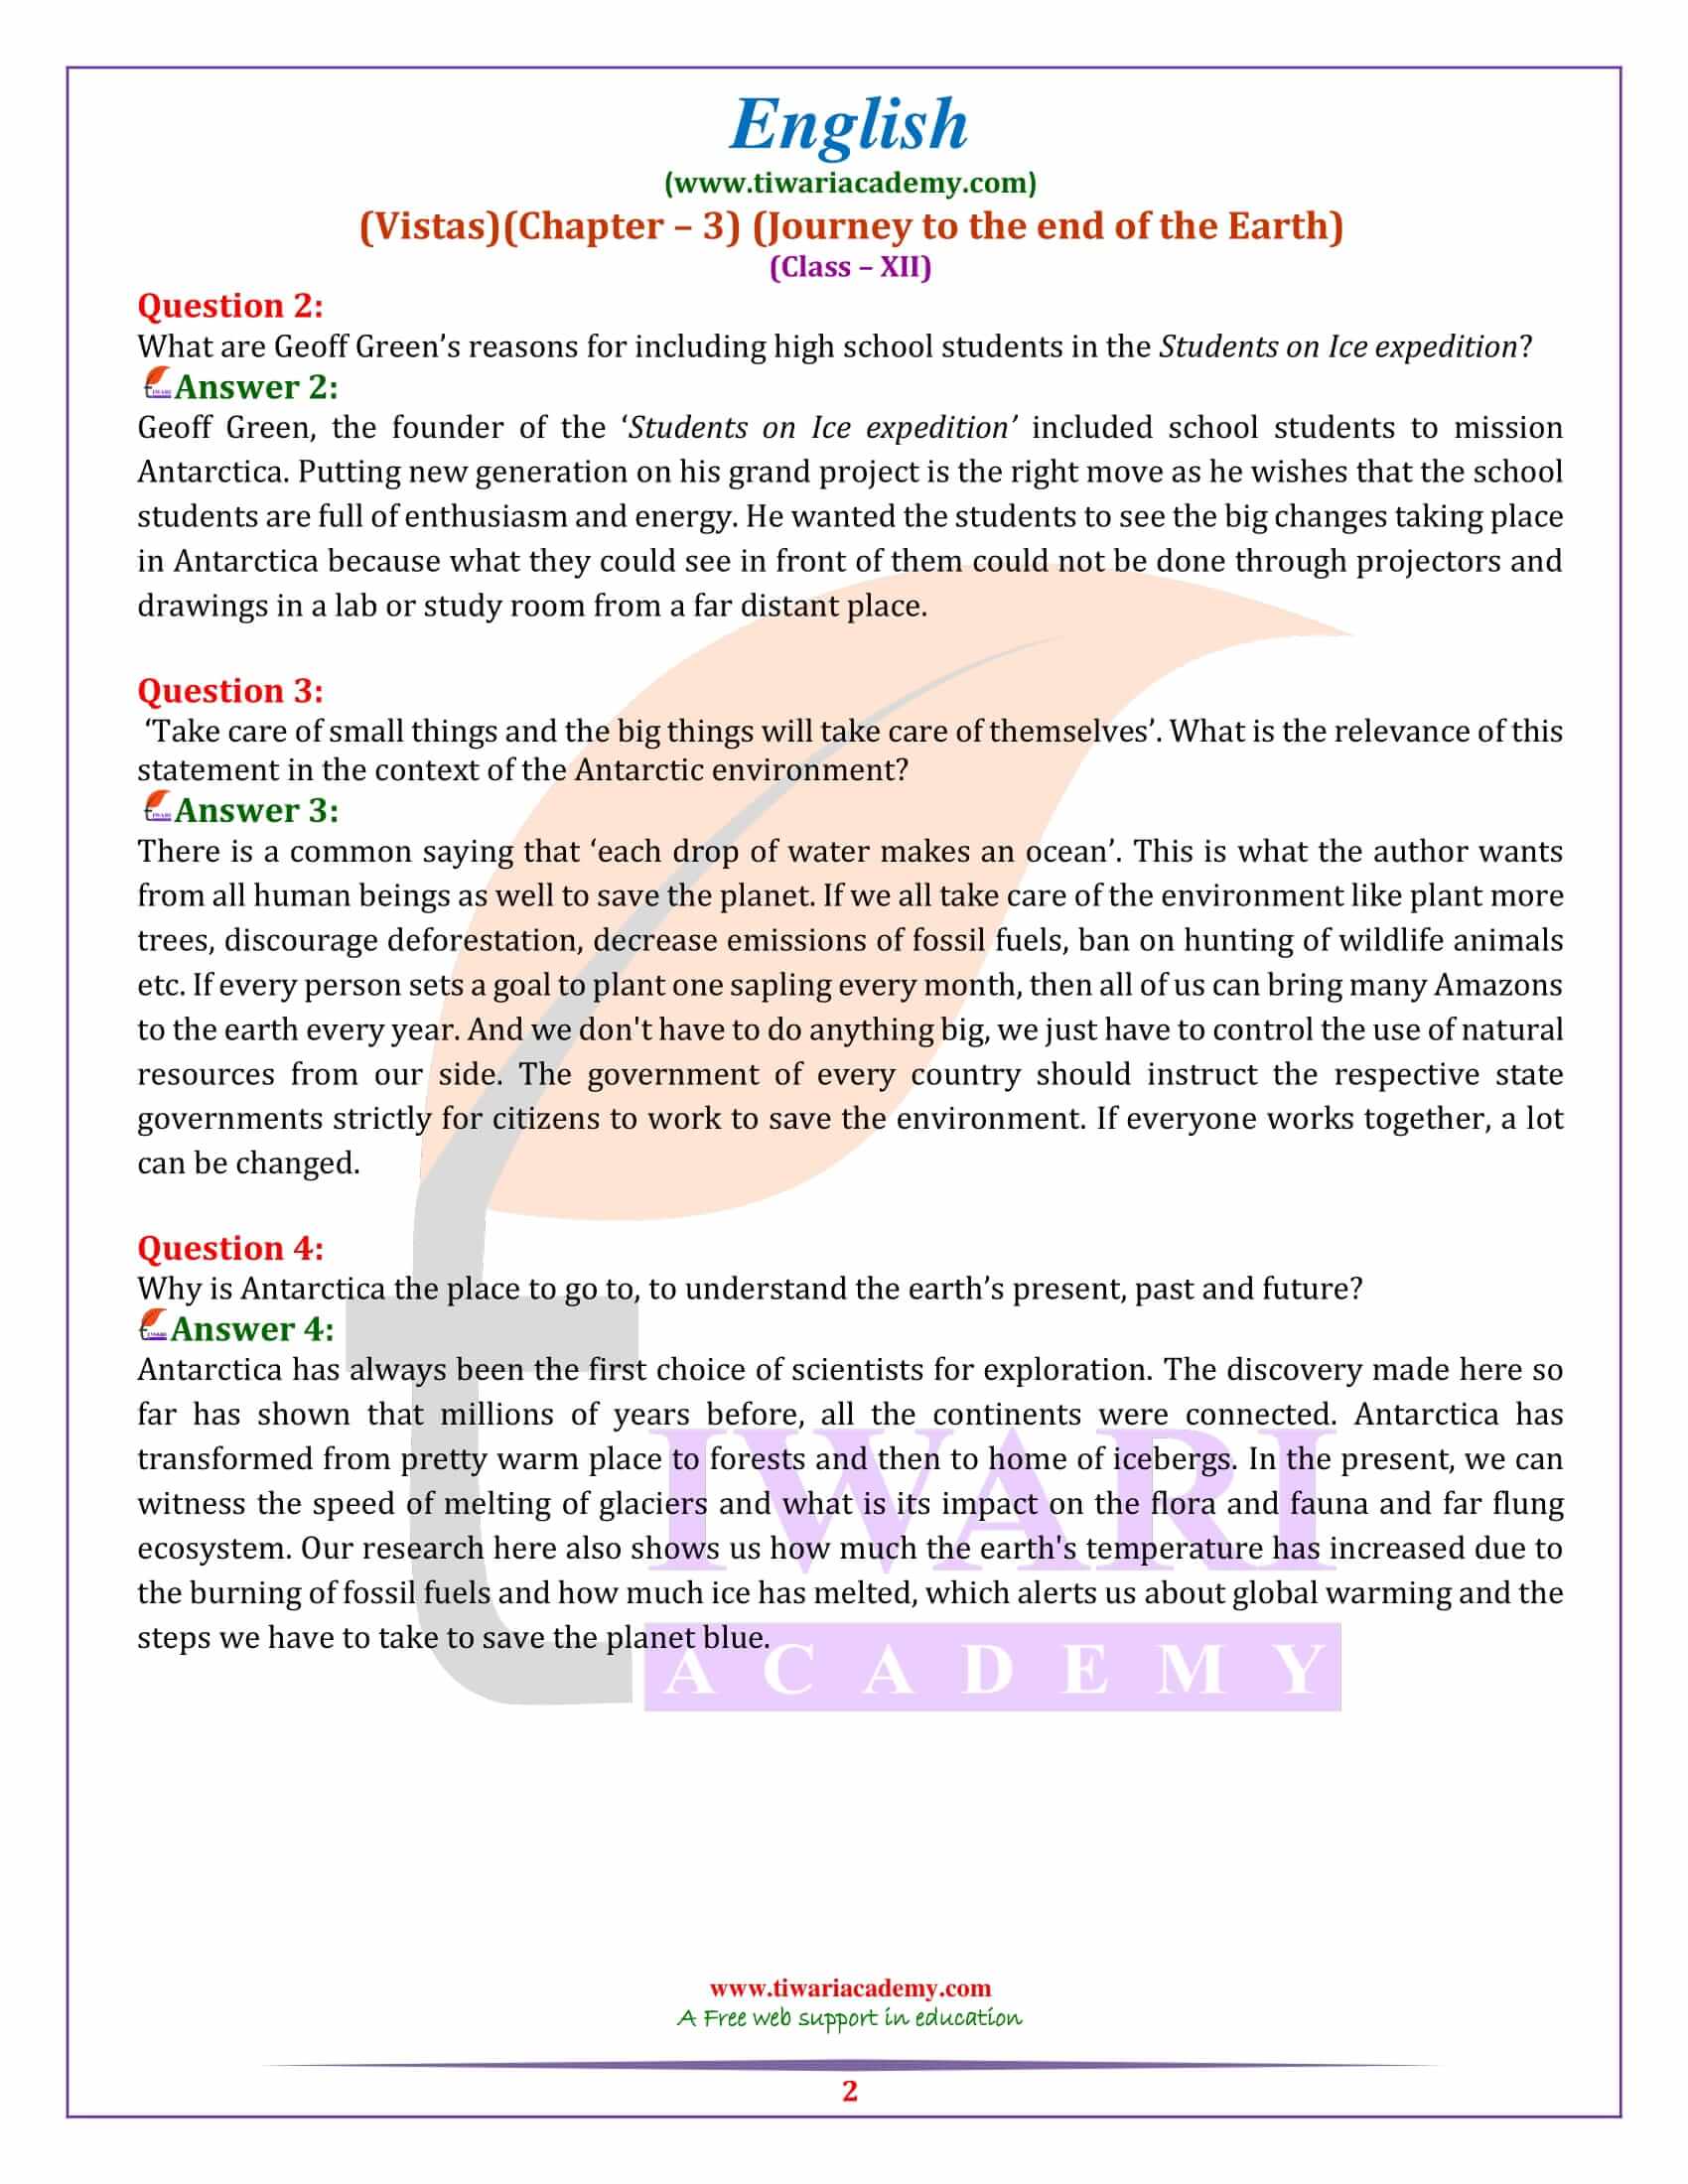 NCERT Solutions for Class 12 English Vistas Chapter 3